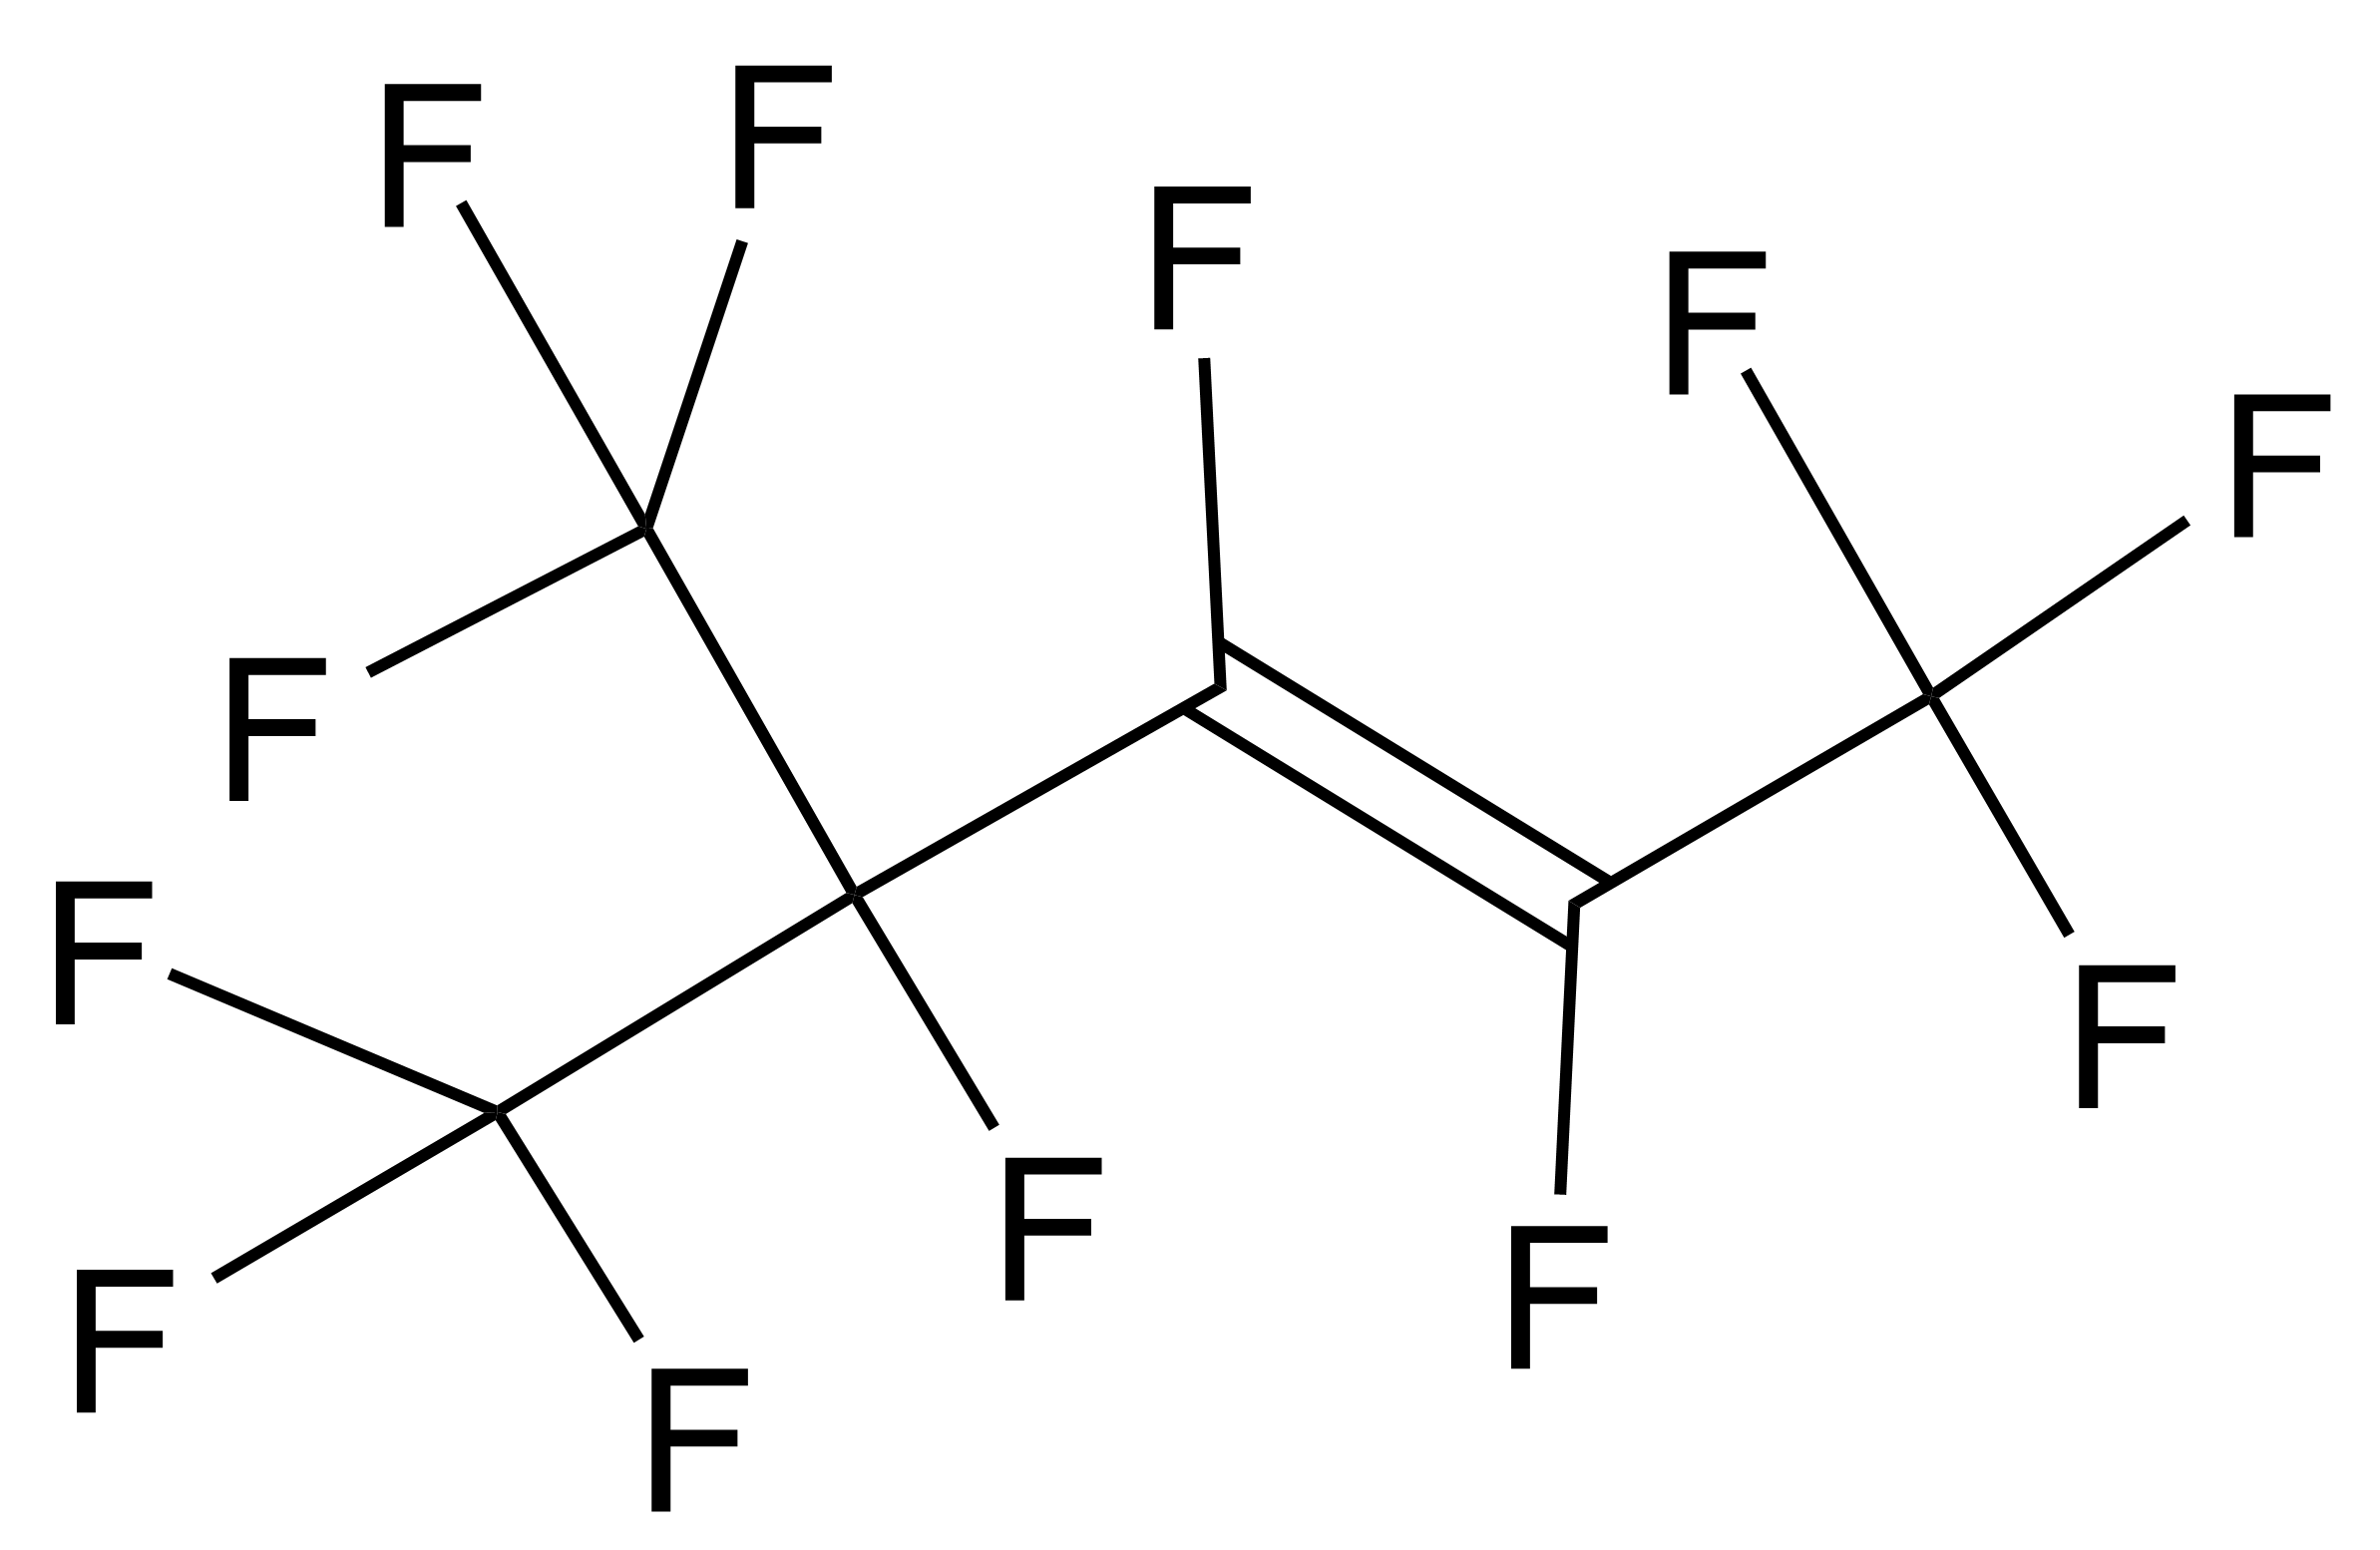 erfluoro(4-methylpent-2-ene) Chemical Structure